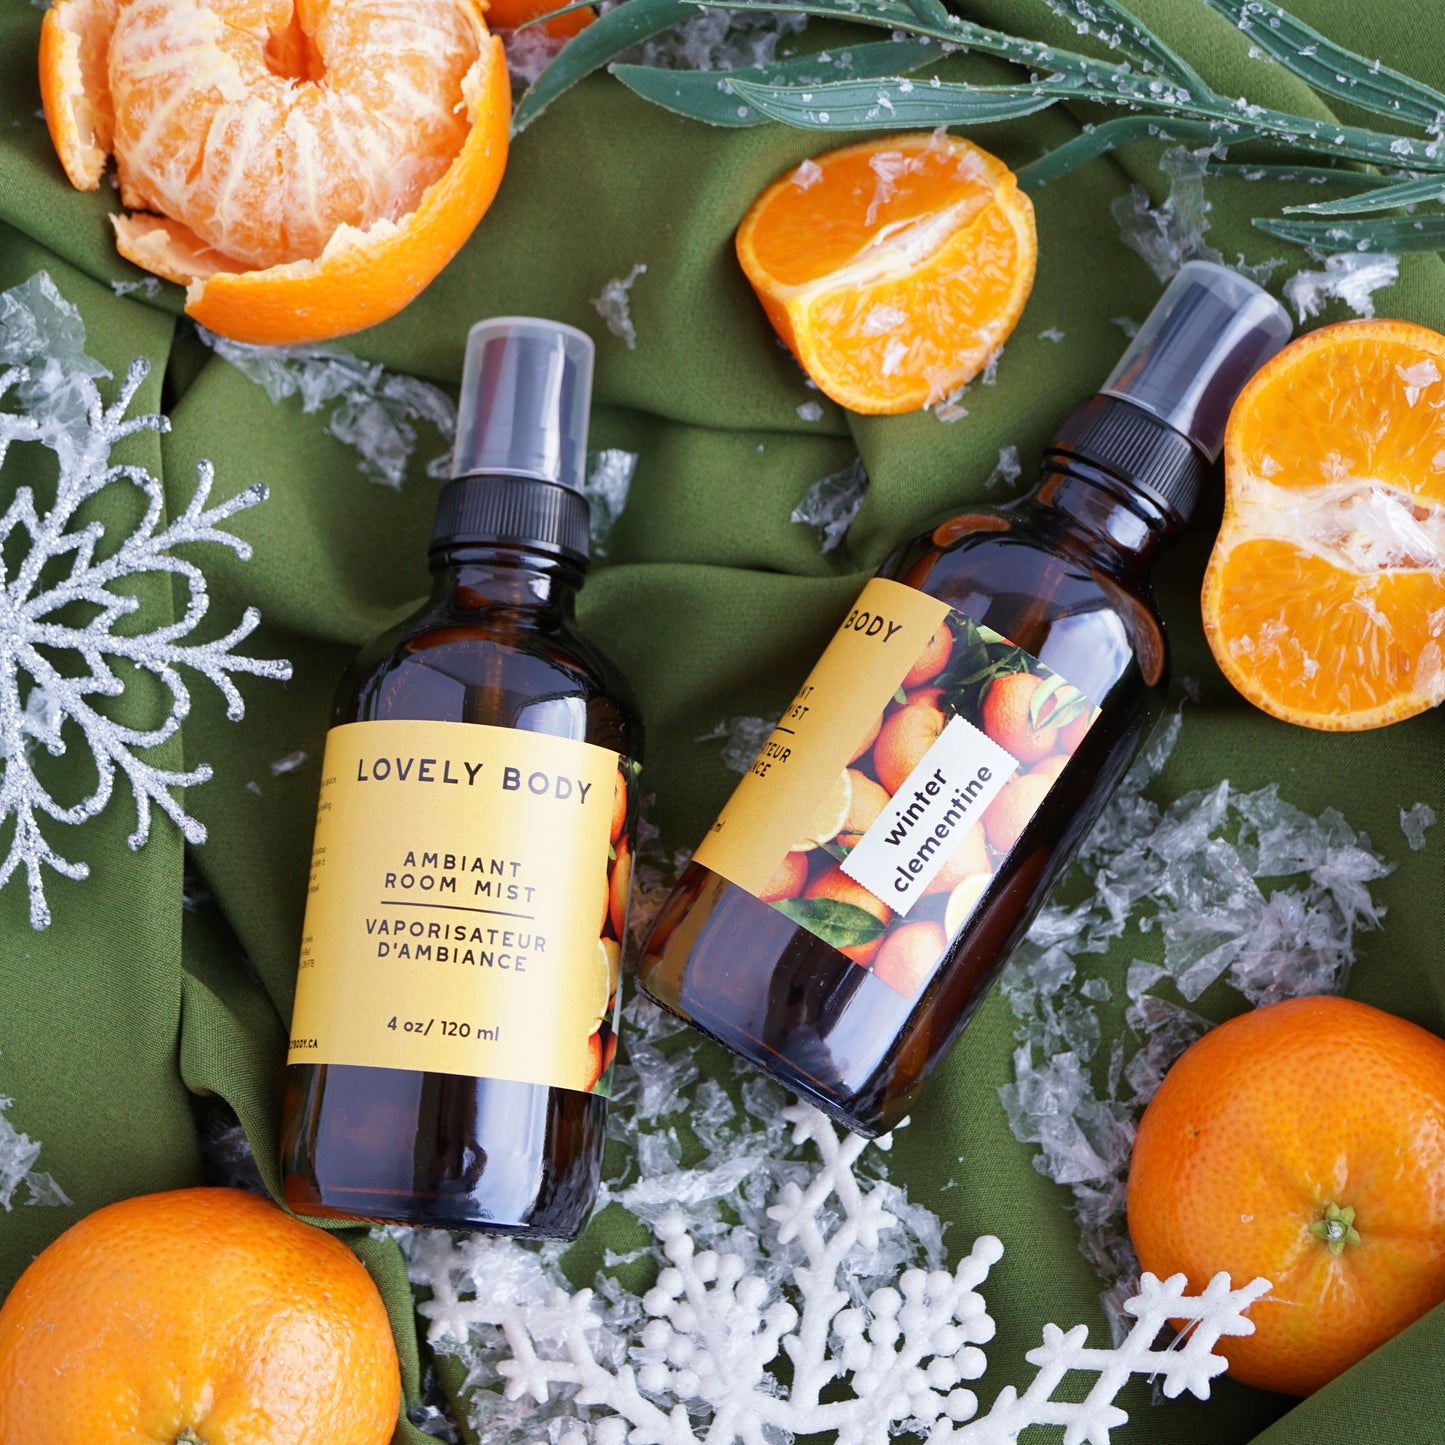 Winter Clementine - NEW Ambiant Room Mist